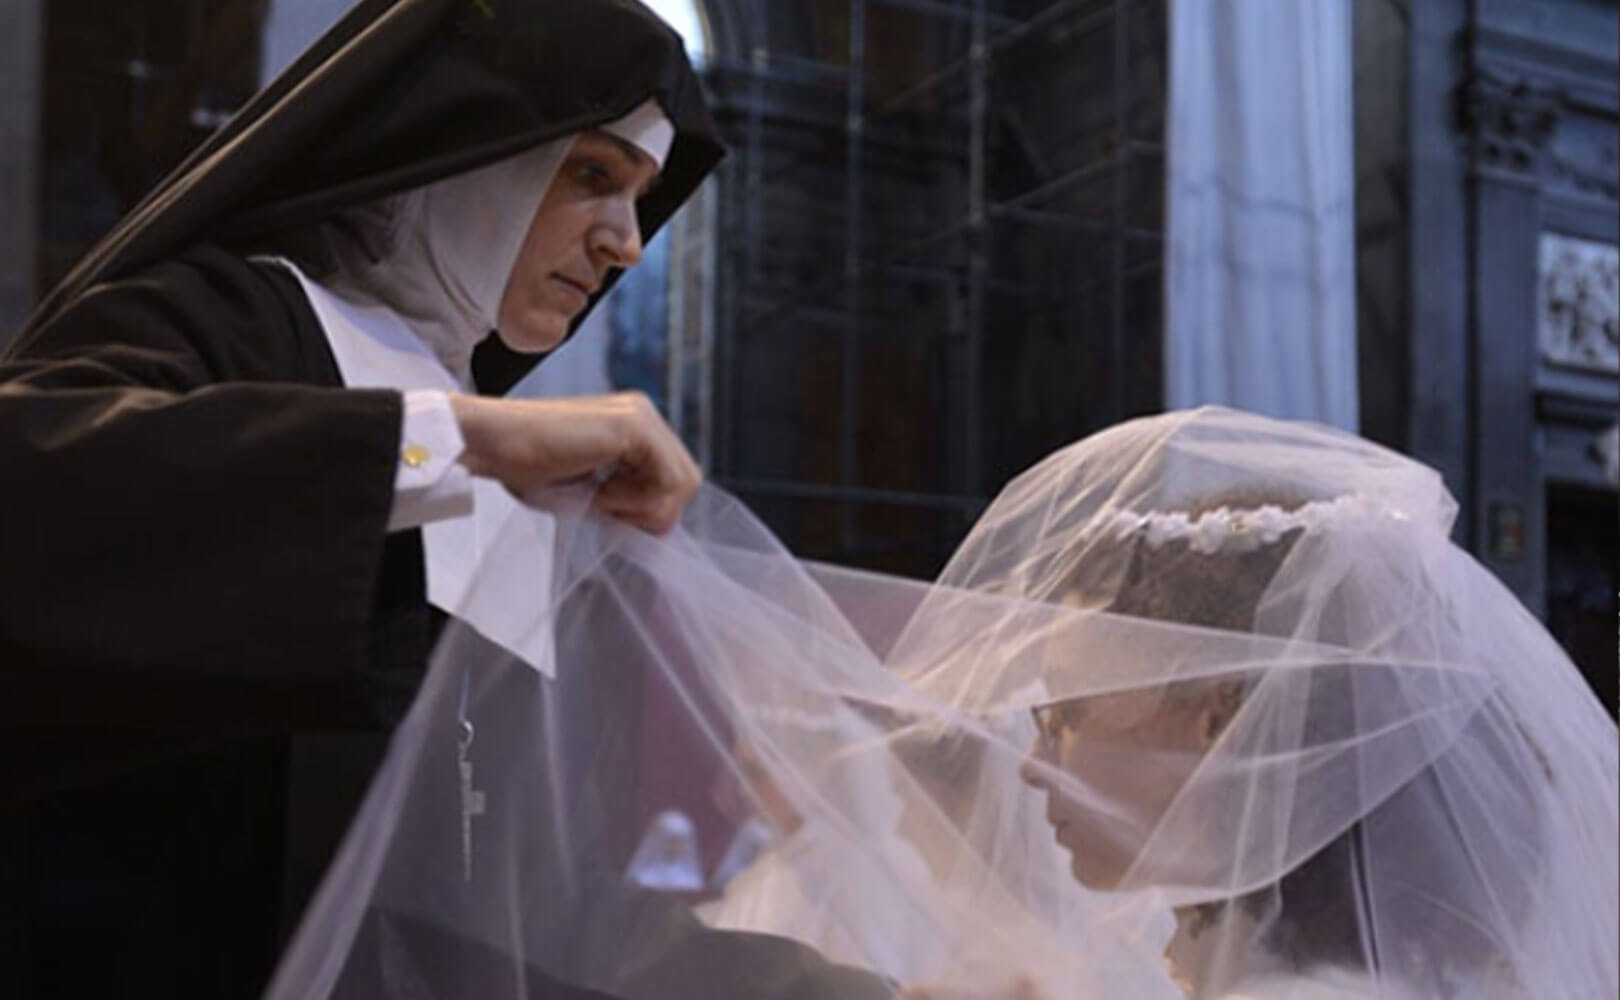 Investiture as a Bridal Ceremony - OnePeterFive